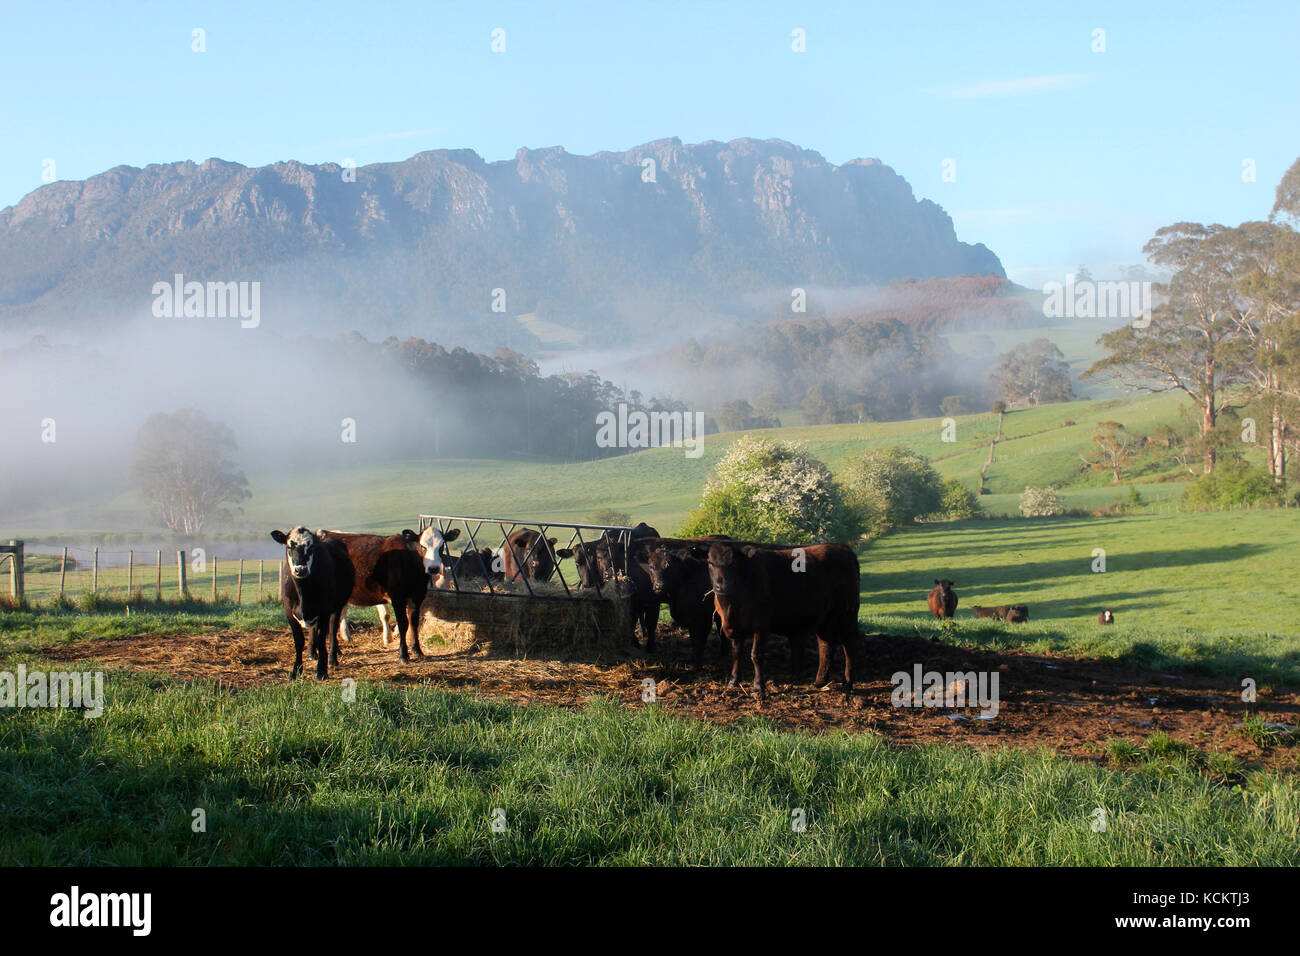 Cattle at a hay feeder with early morning mist lingering, Mount Roland beyond. Near Sheffield, northwest Tasmania, Australia Stock Photo